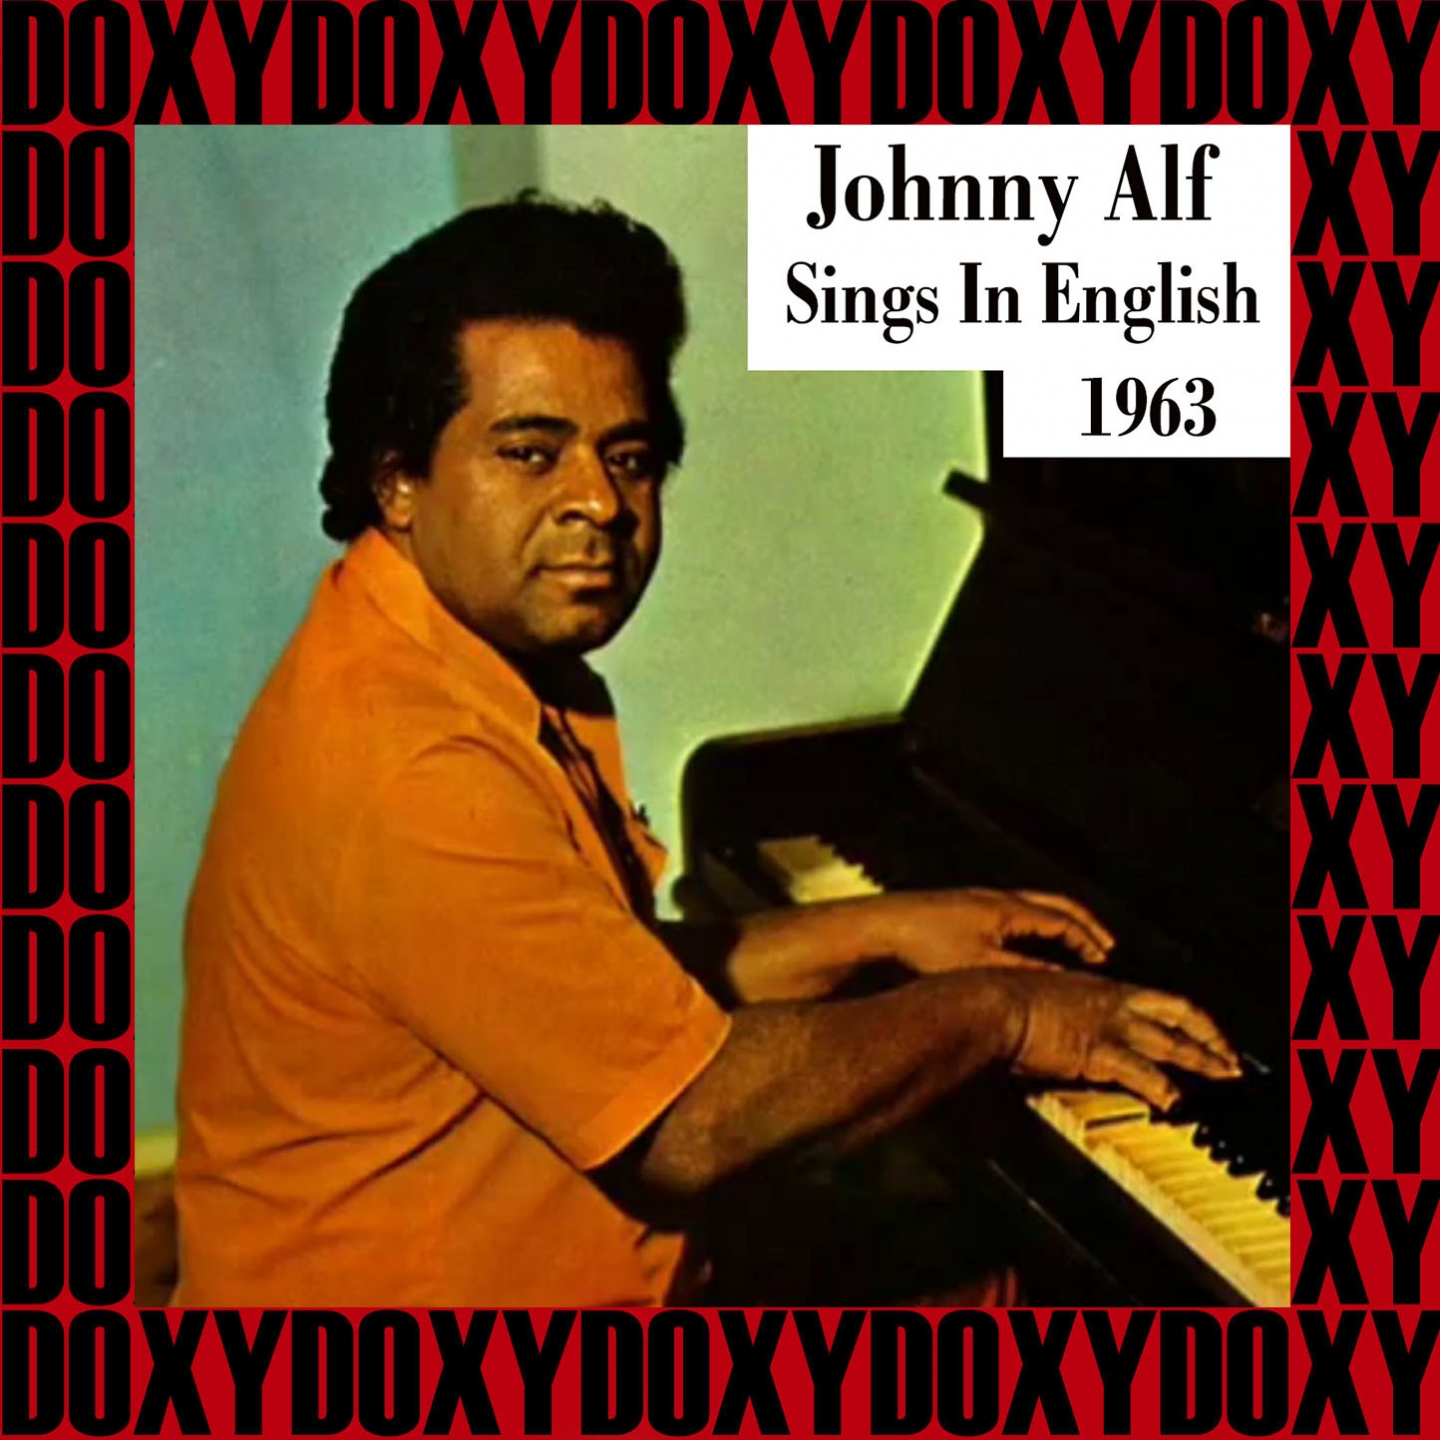 Sings in English, 1963 (Doxy Collection Remastered)